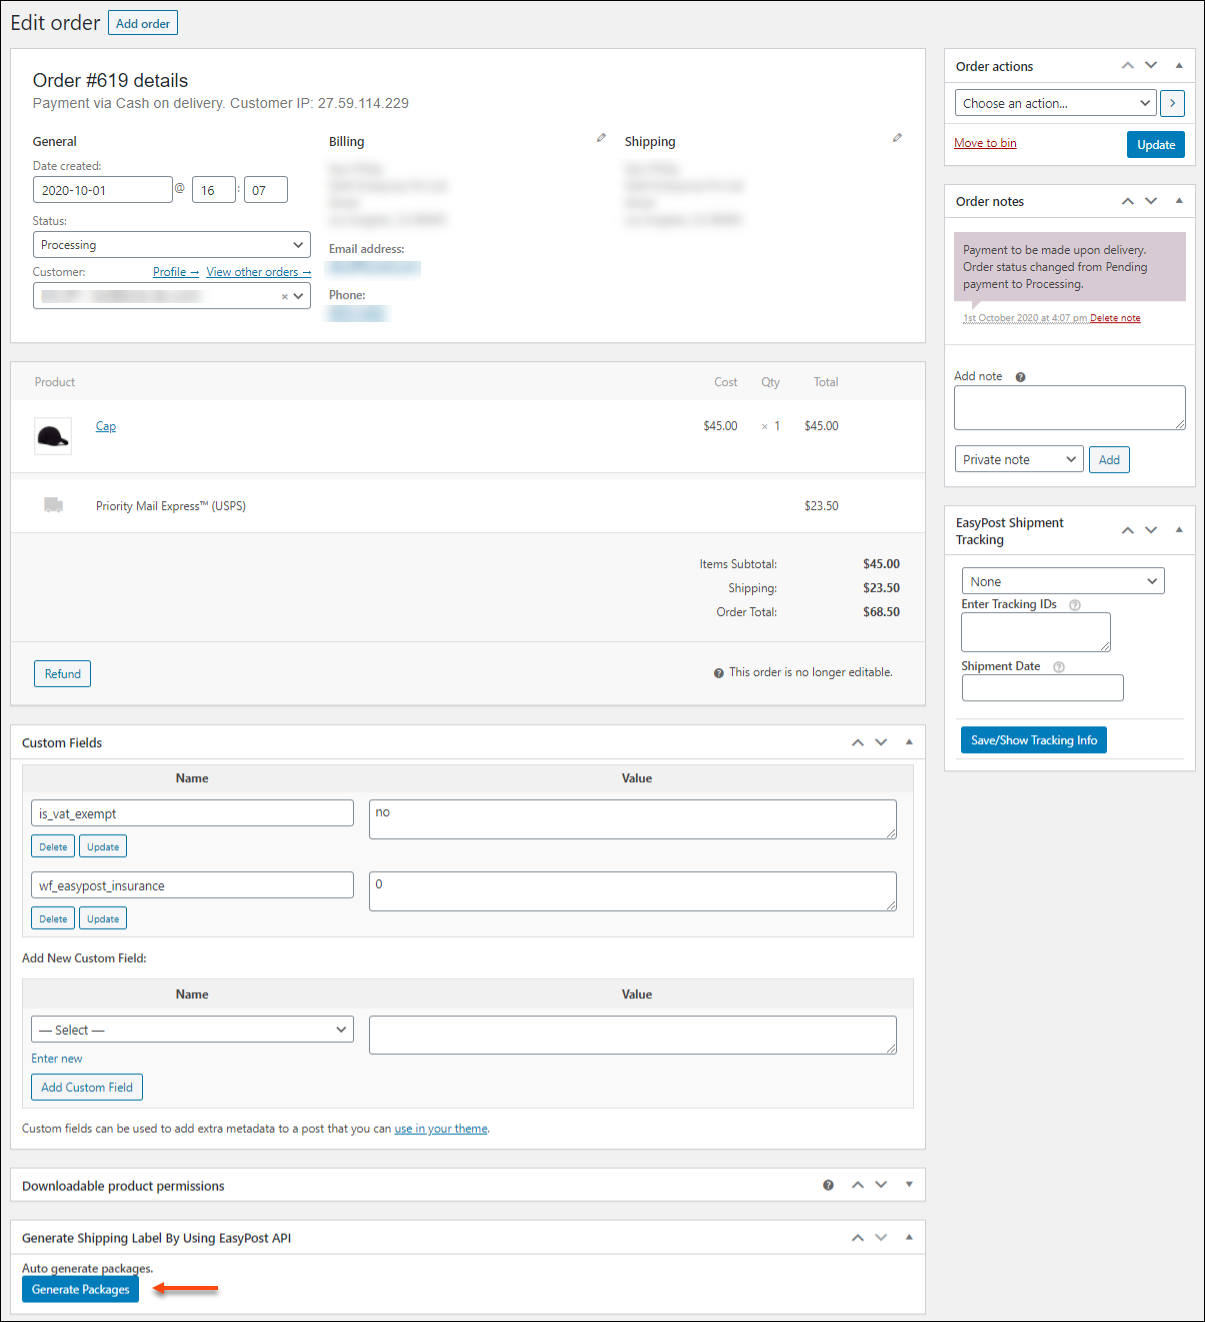 shipment and label generation